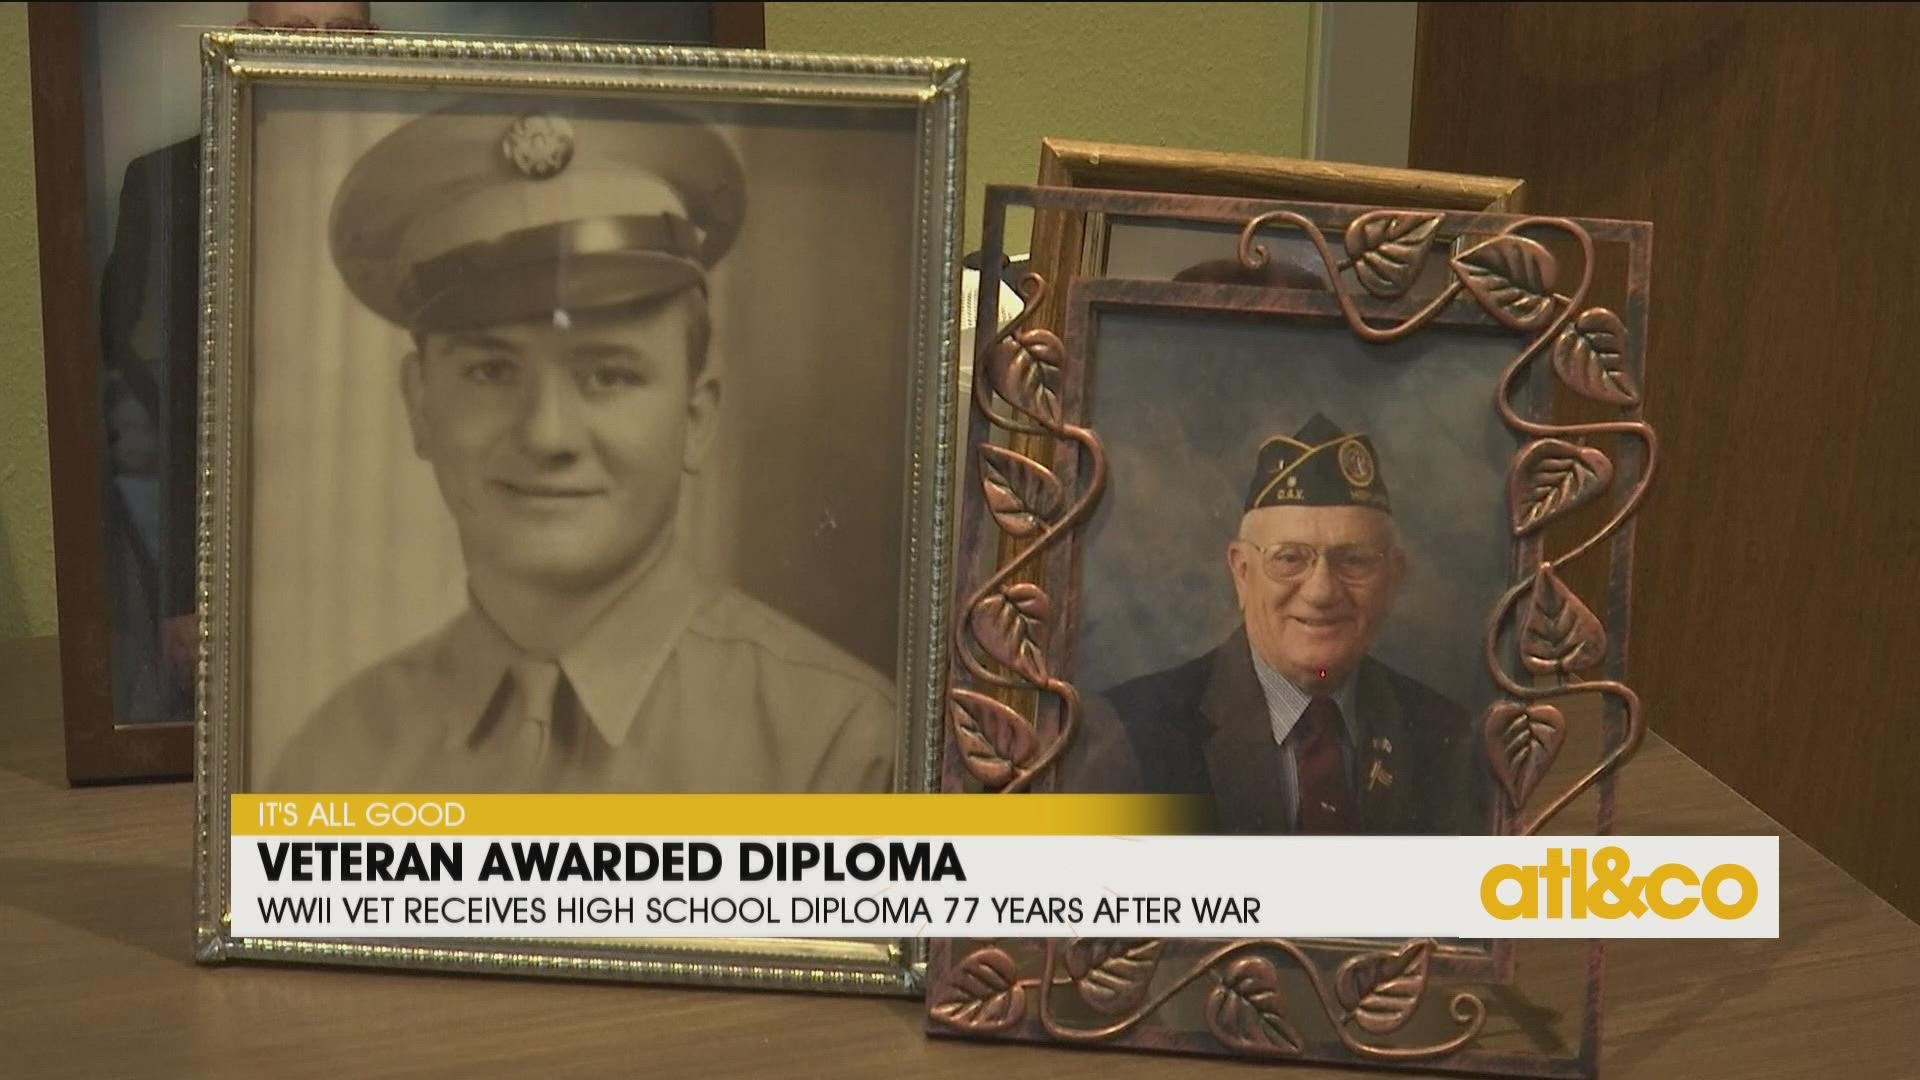 77 years after the war, 98-year-old veteran Donald Huisenga finally received his well-deserved high school diploma in a special ceremony.